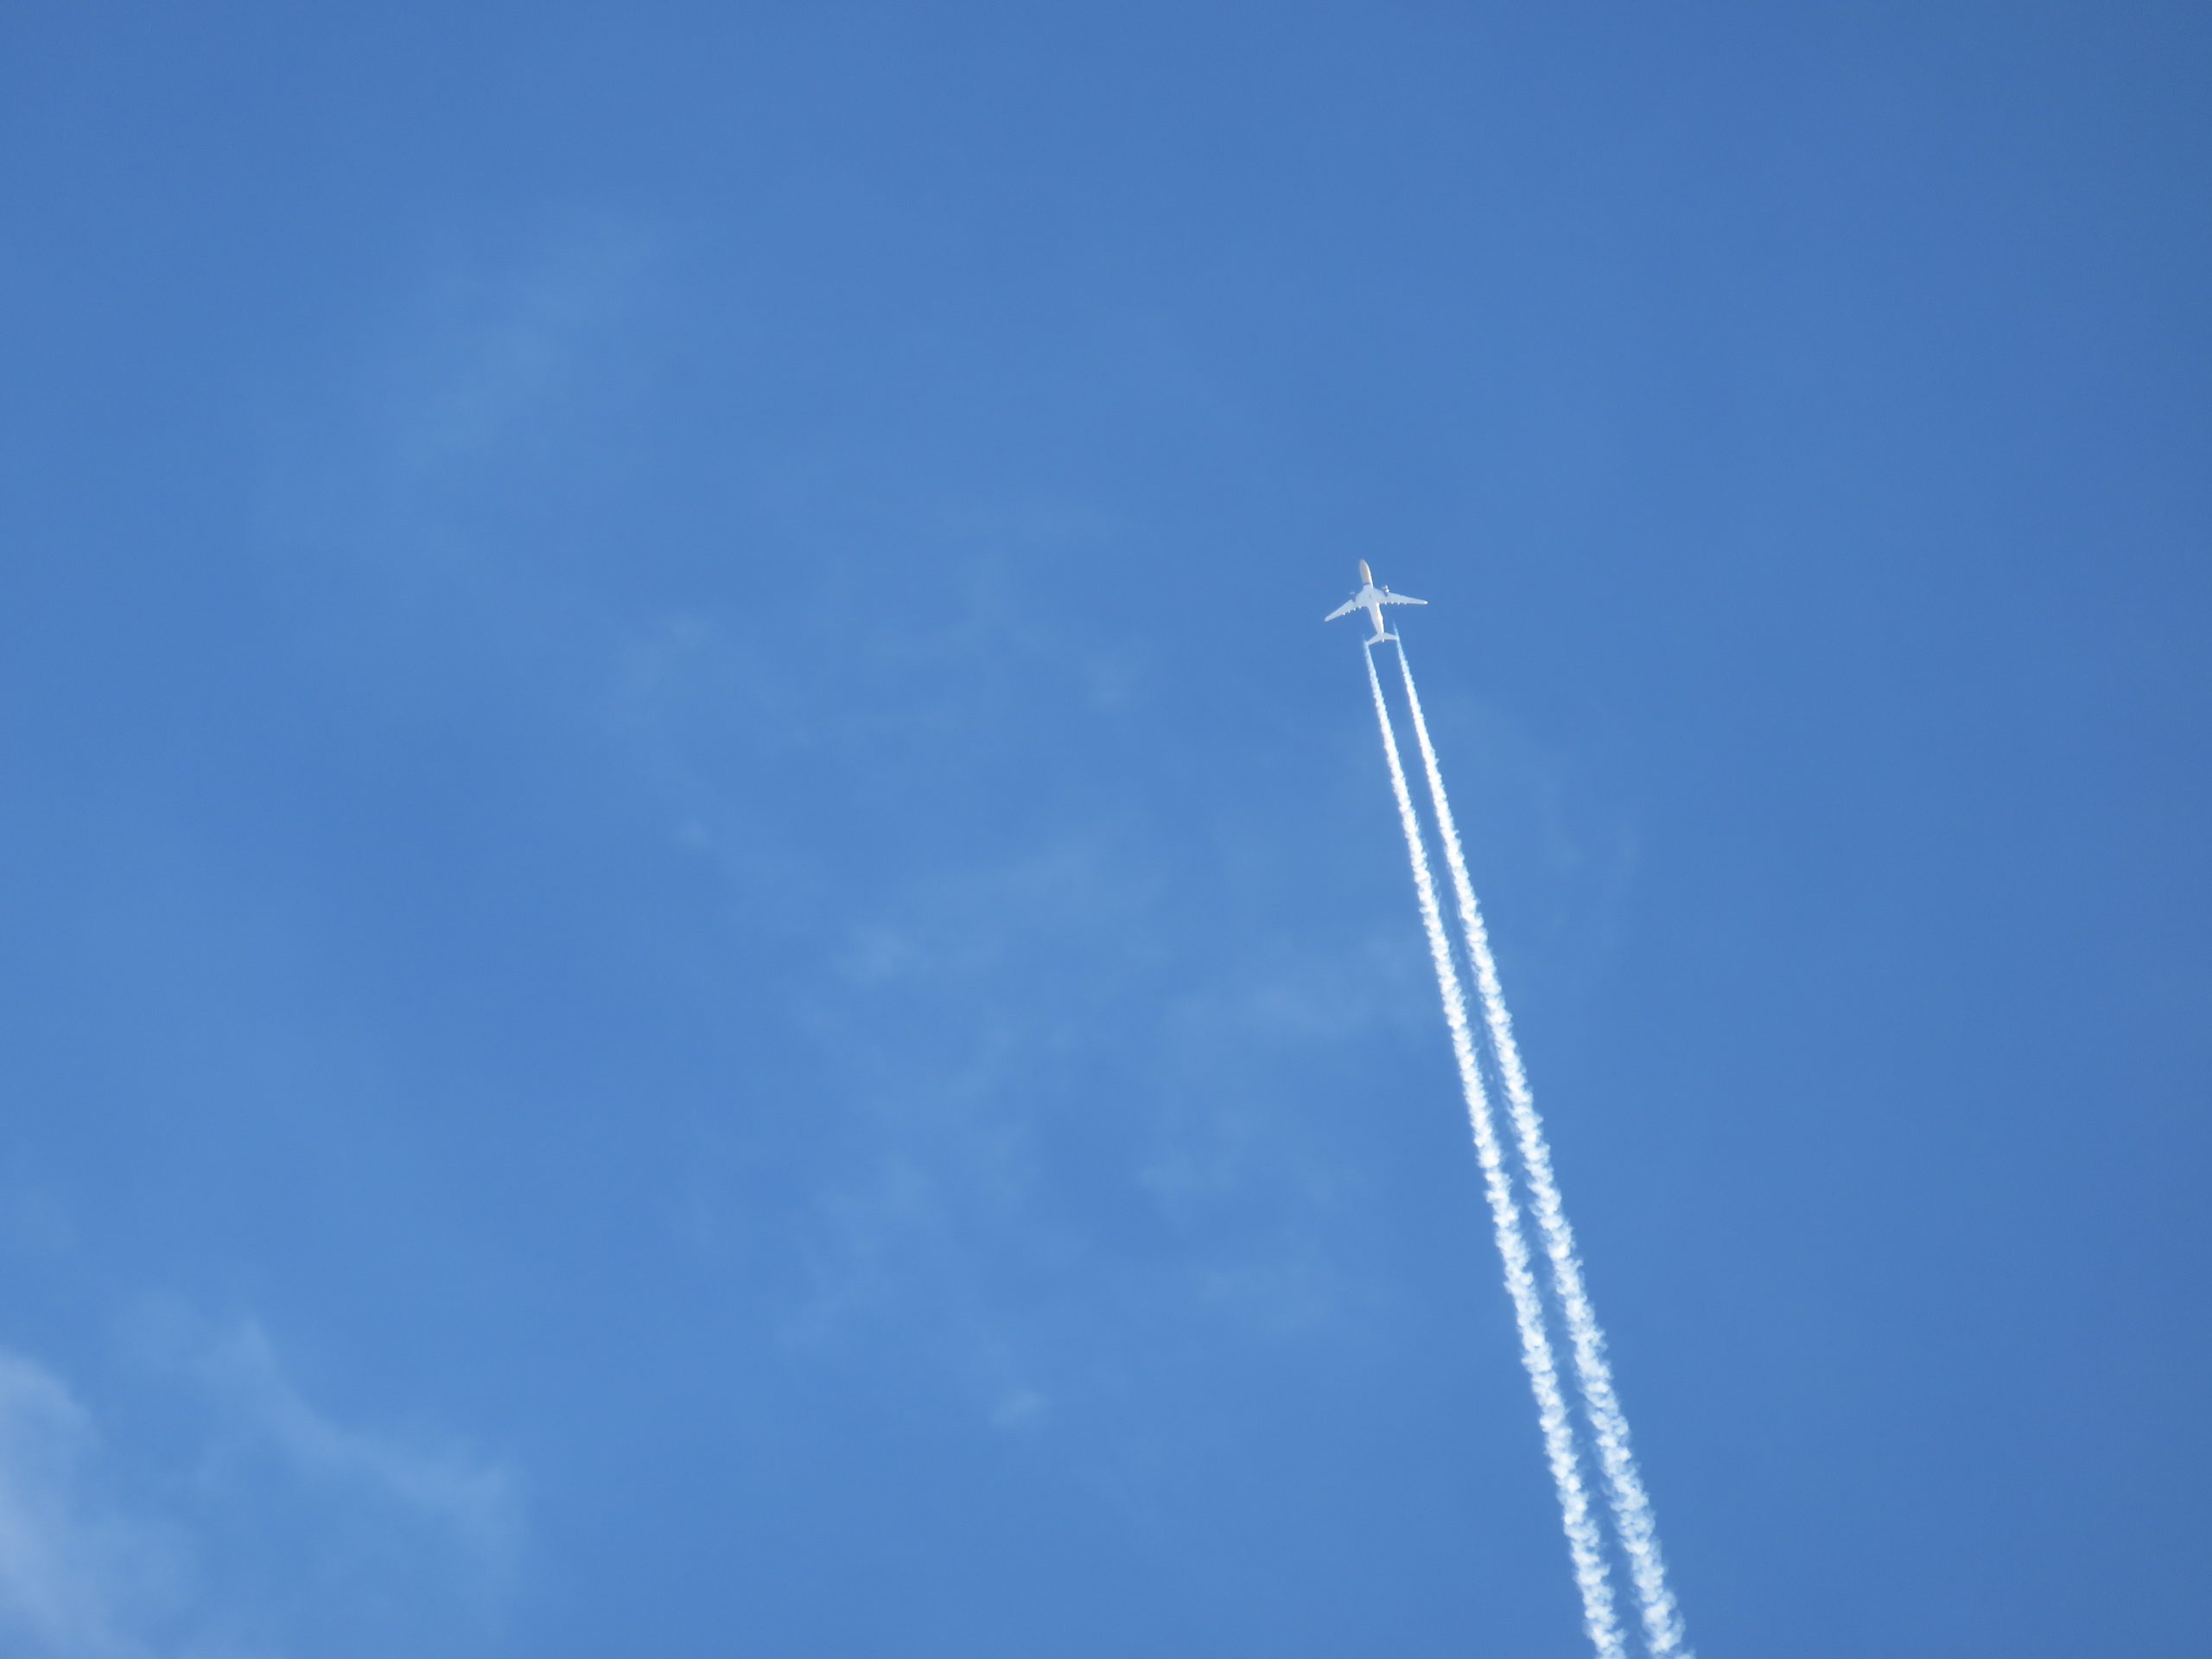 A plane flying at high altitude